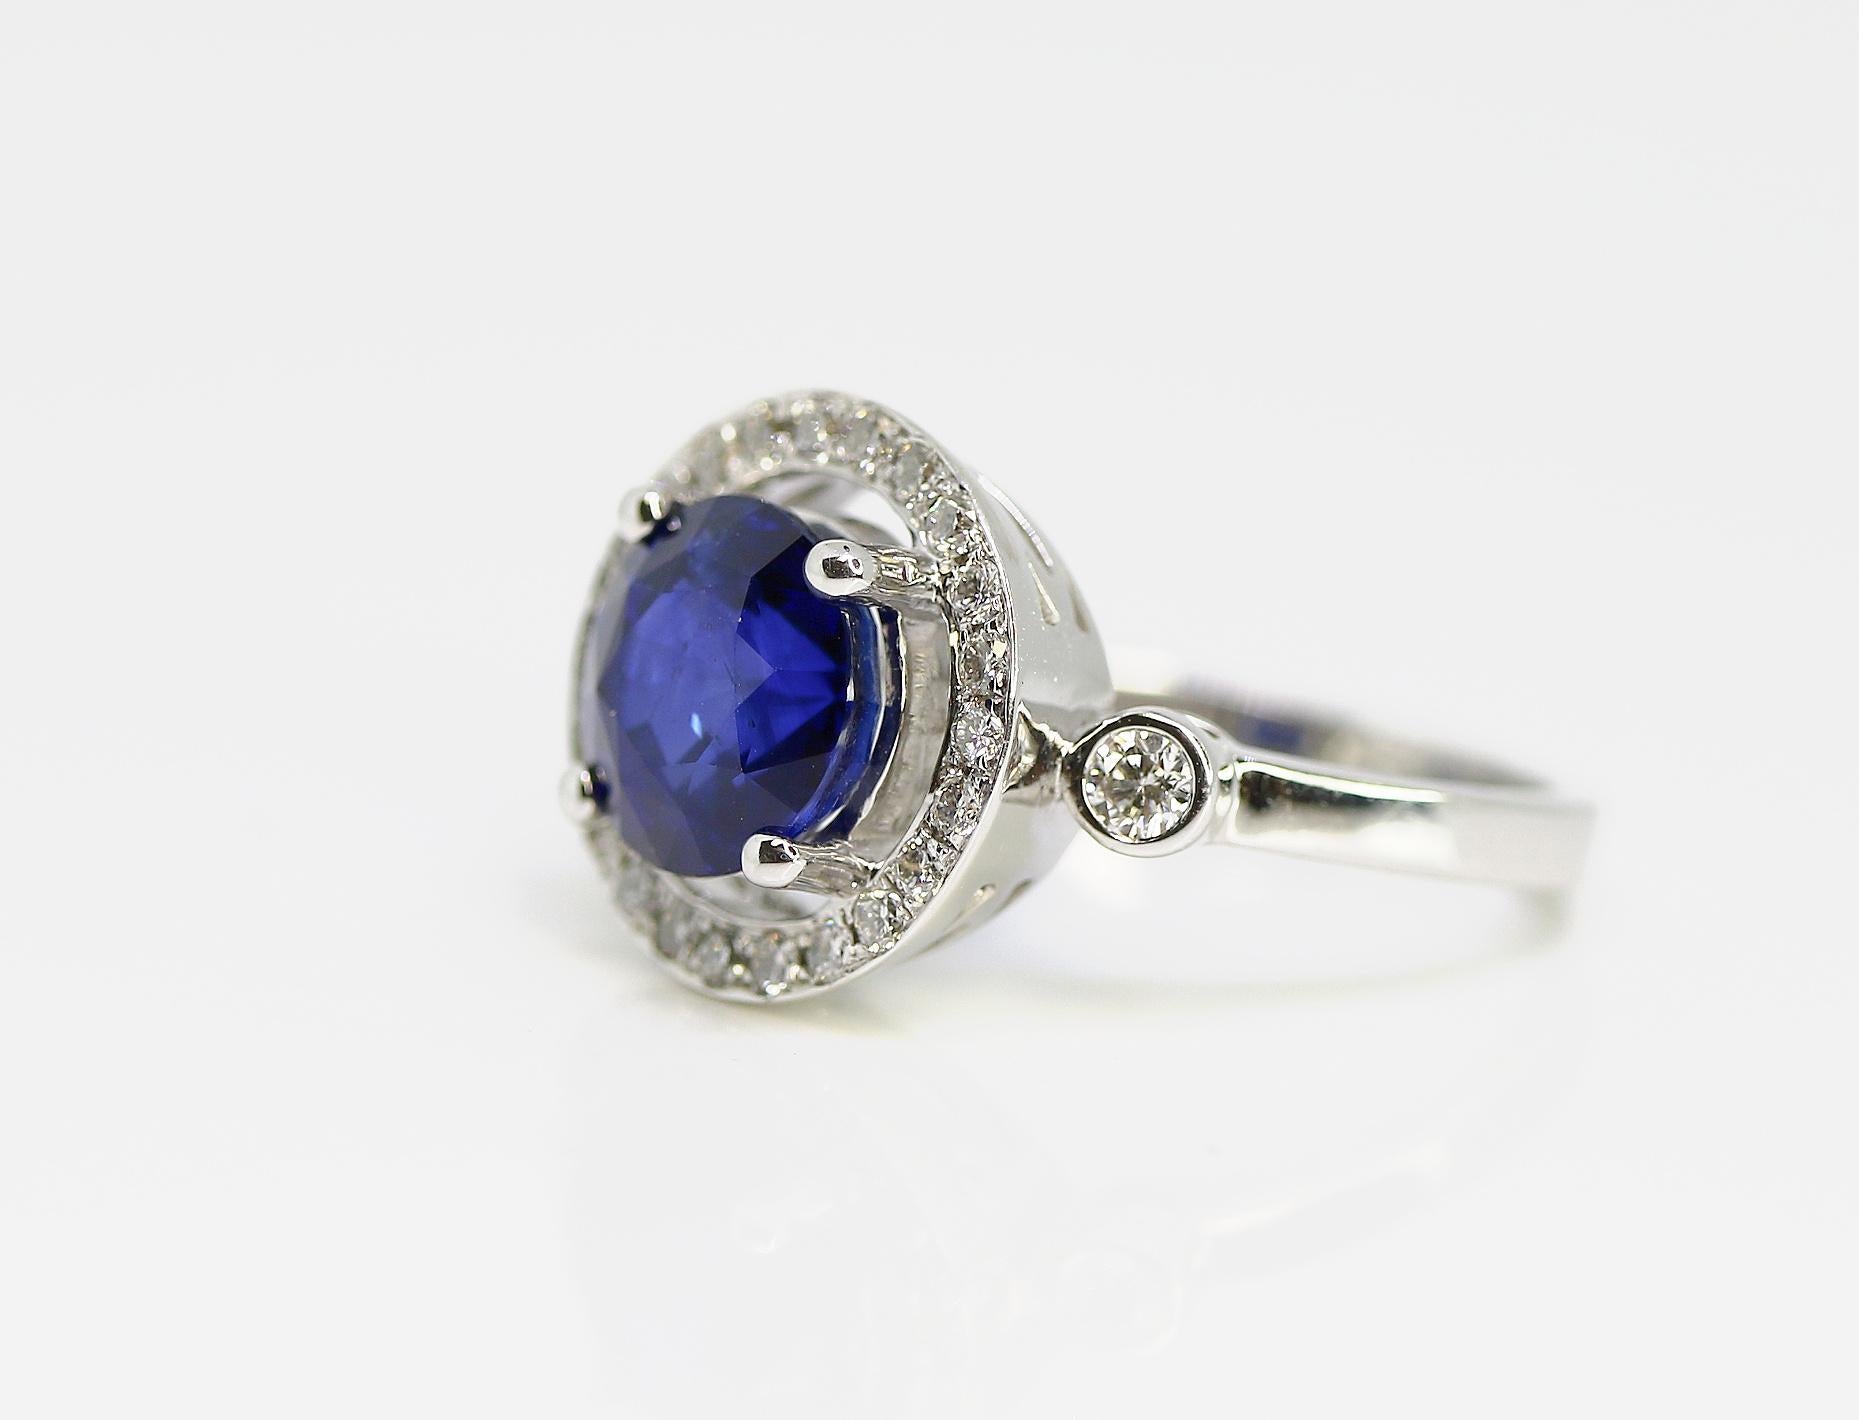 This 3.17ct blue Sapphire set in 18K white gold ring with a specially designed round Halo with colorless diamonds =0.38cttw